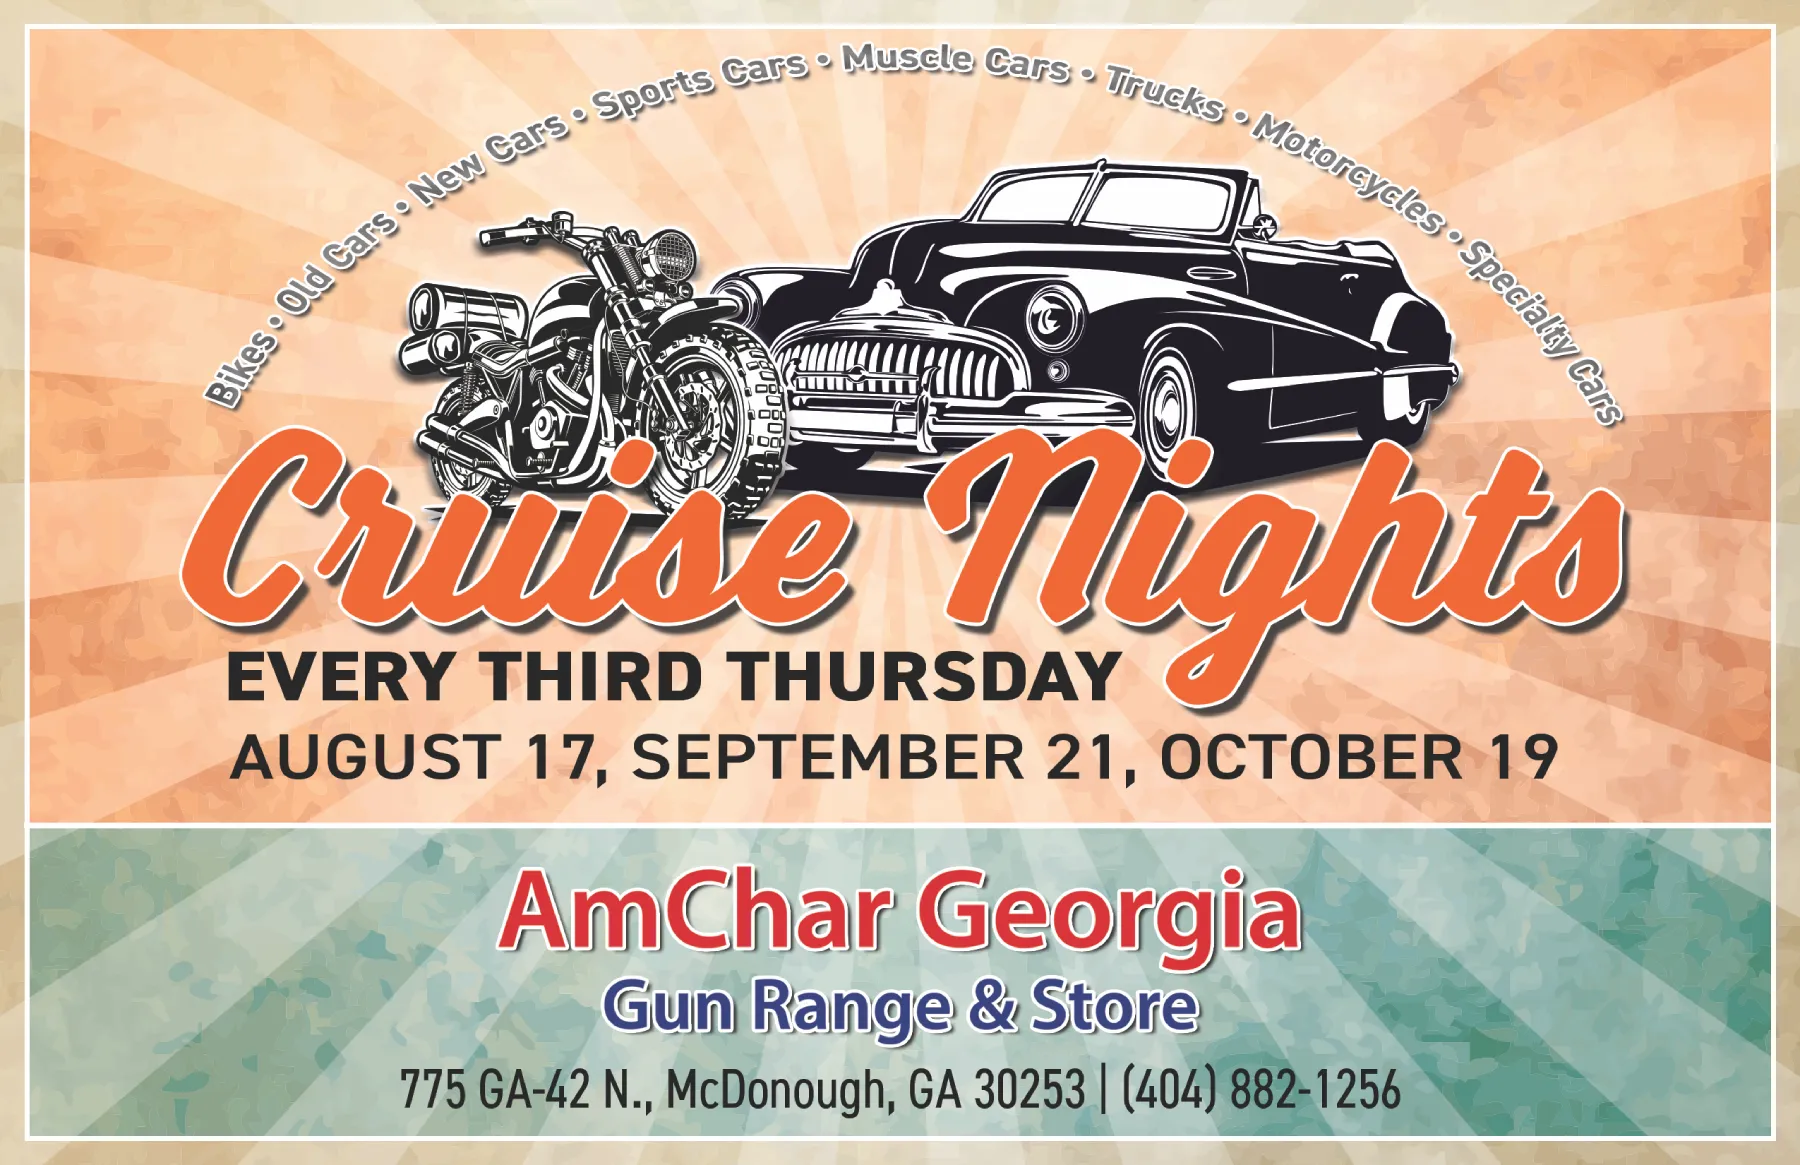 Cruise Nights at Amchar! Cars, motorcycles, trucks. If it has wheels on it, bring it!